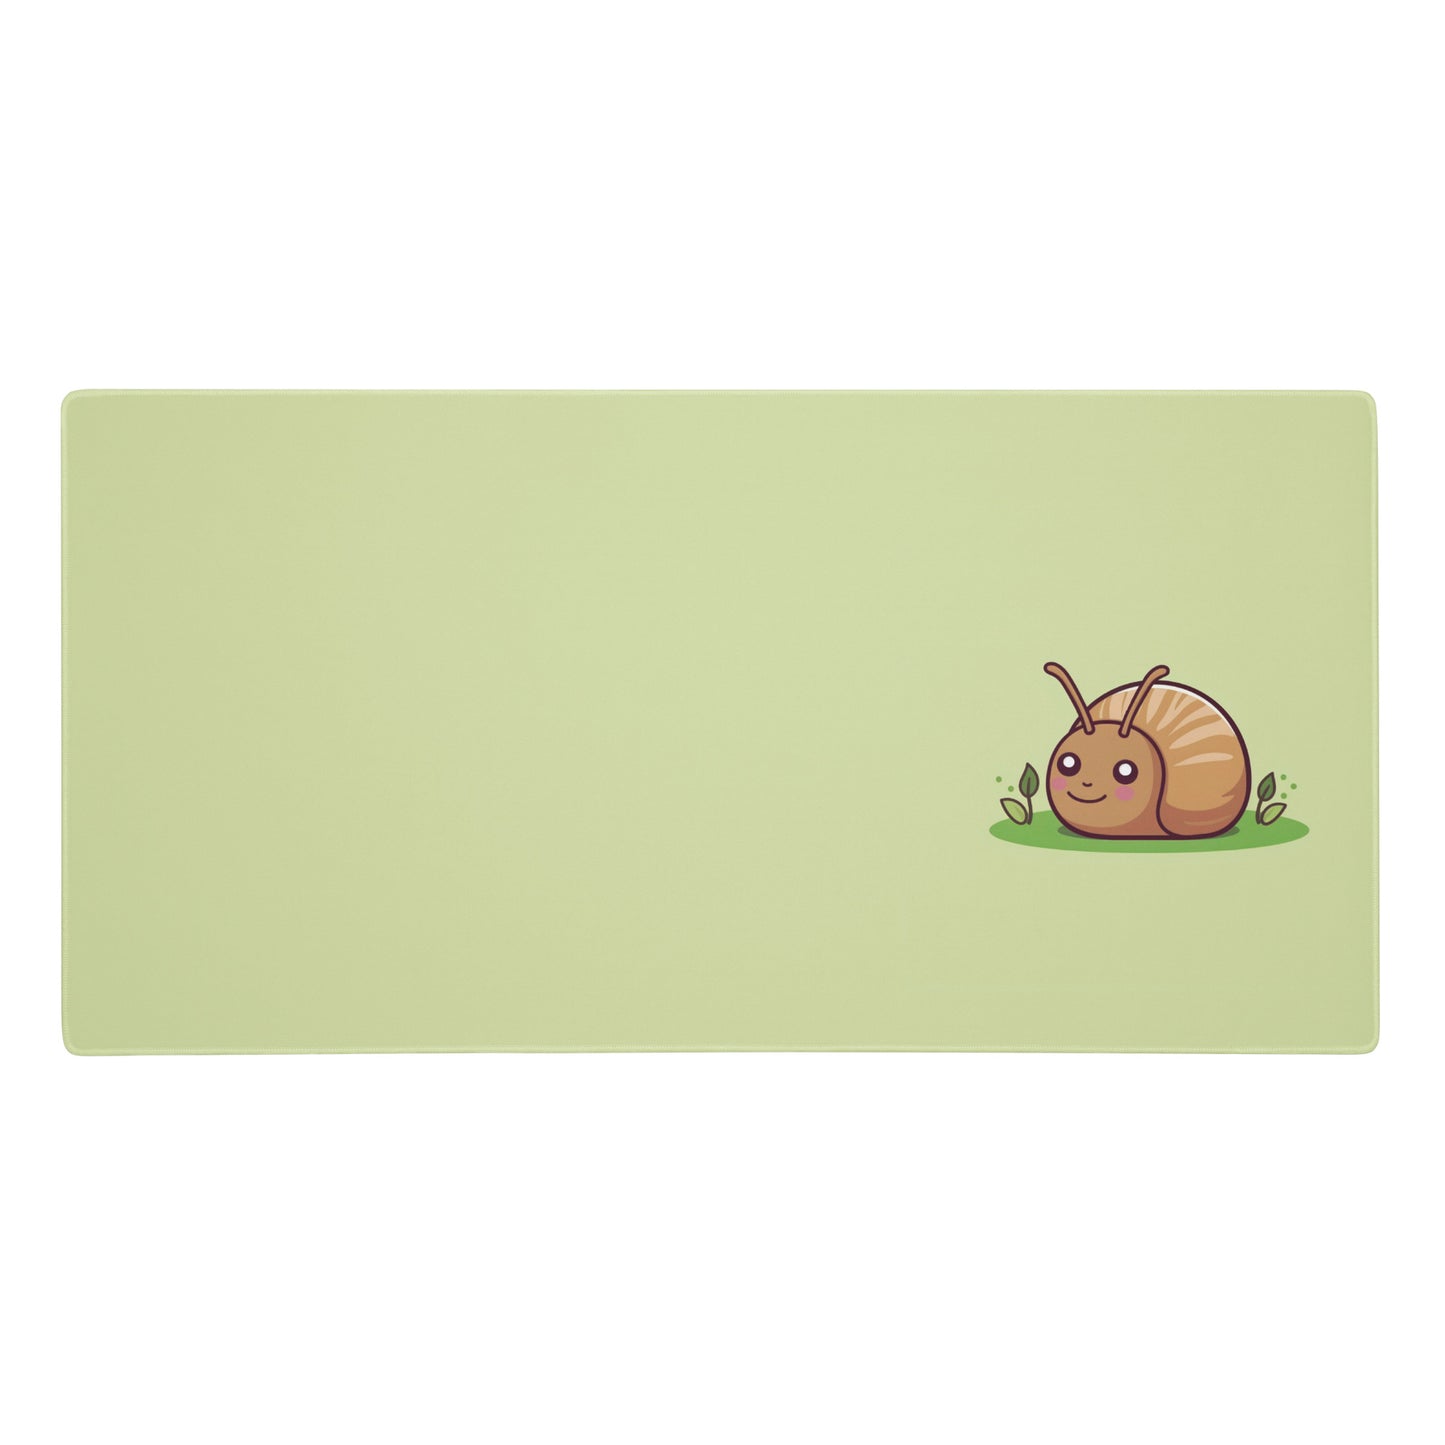 A 36" x 18" desk pad with a cute snail on it. Green in color.